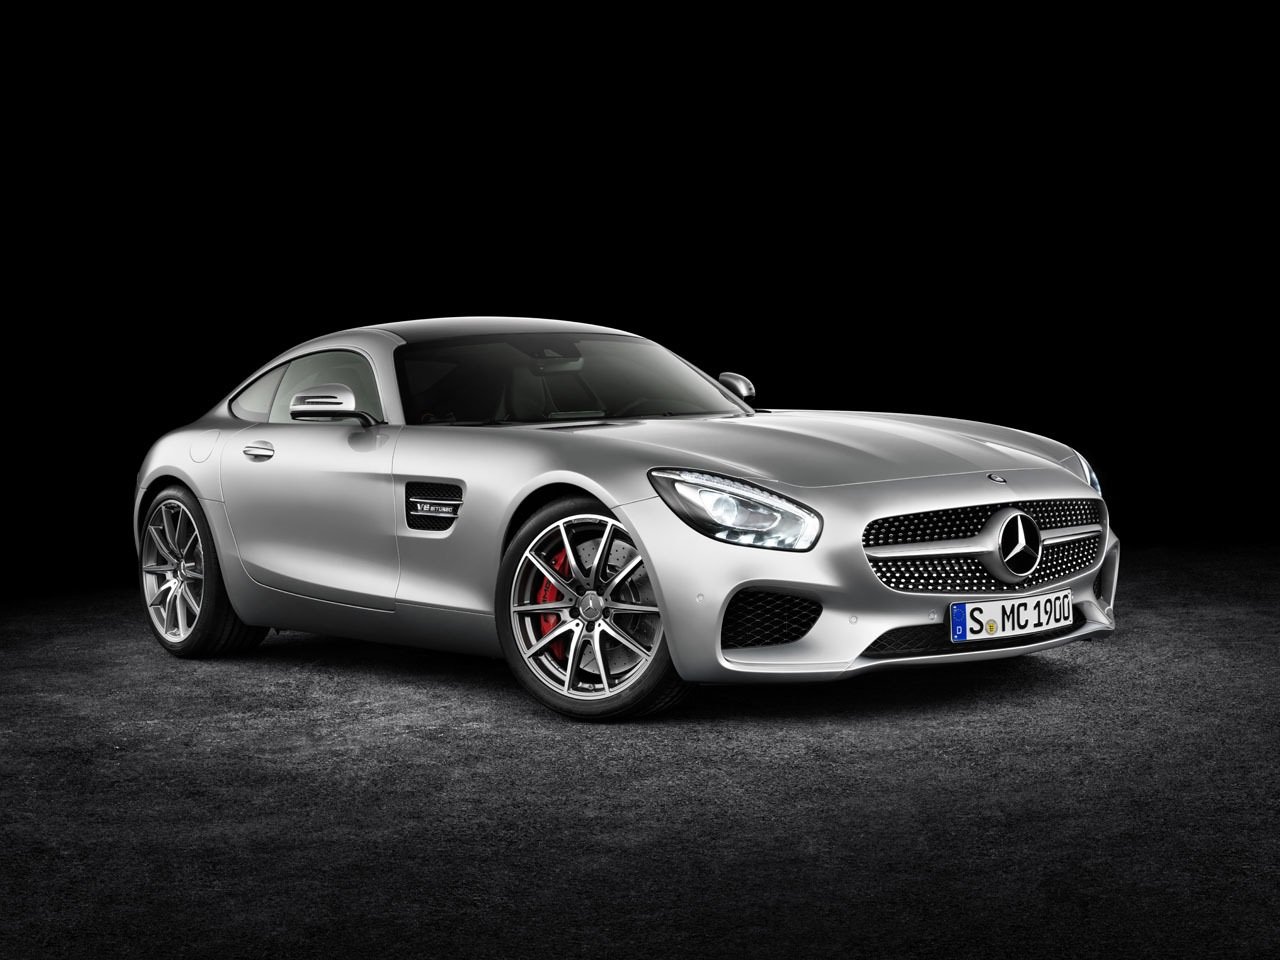 Picture of Mercedes-Benz AMG GT